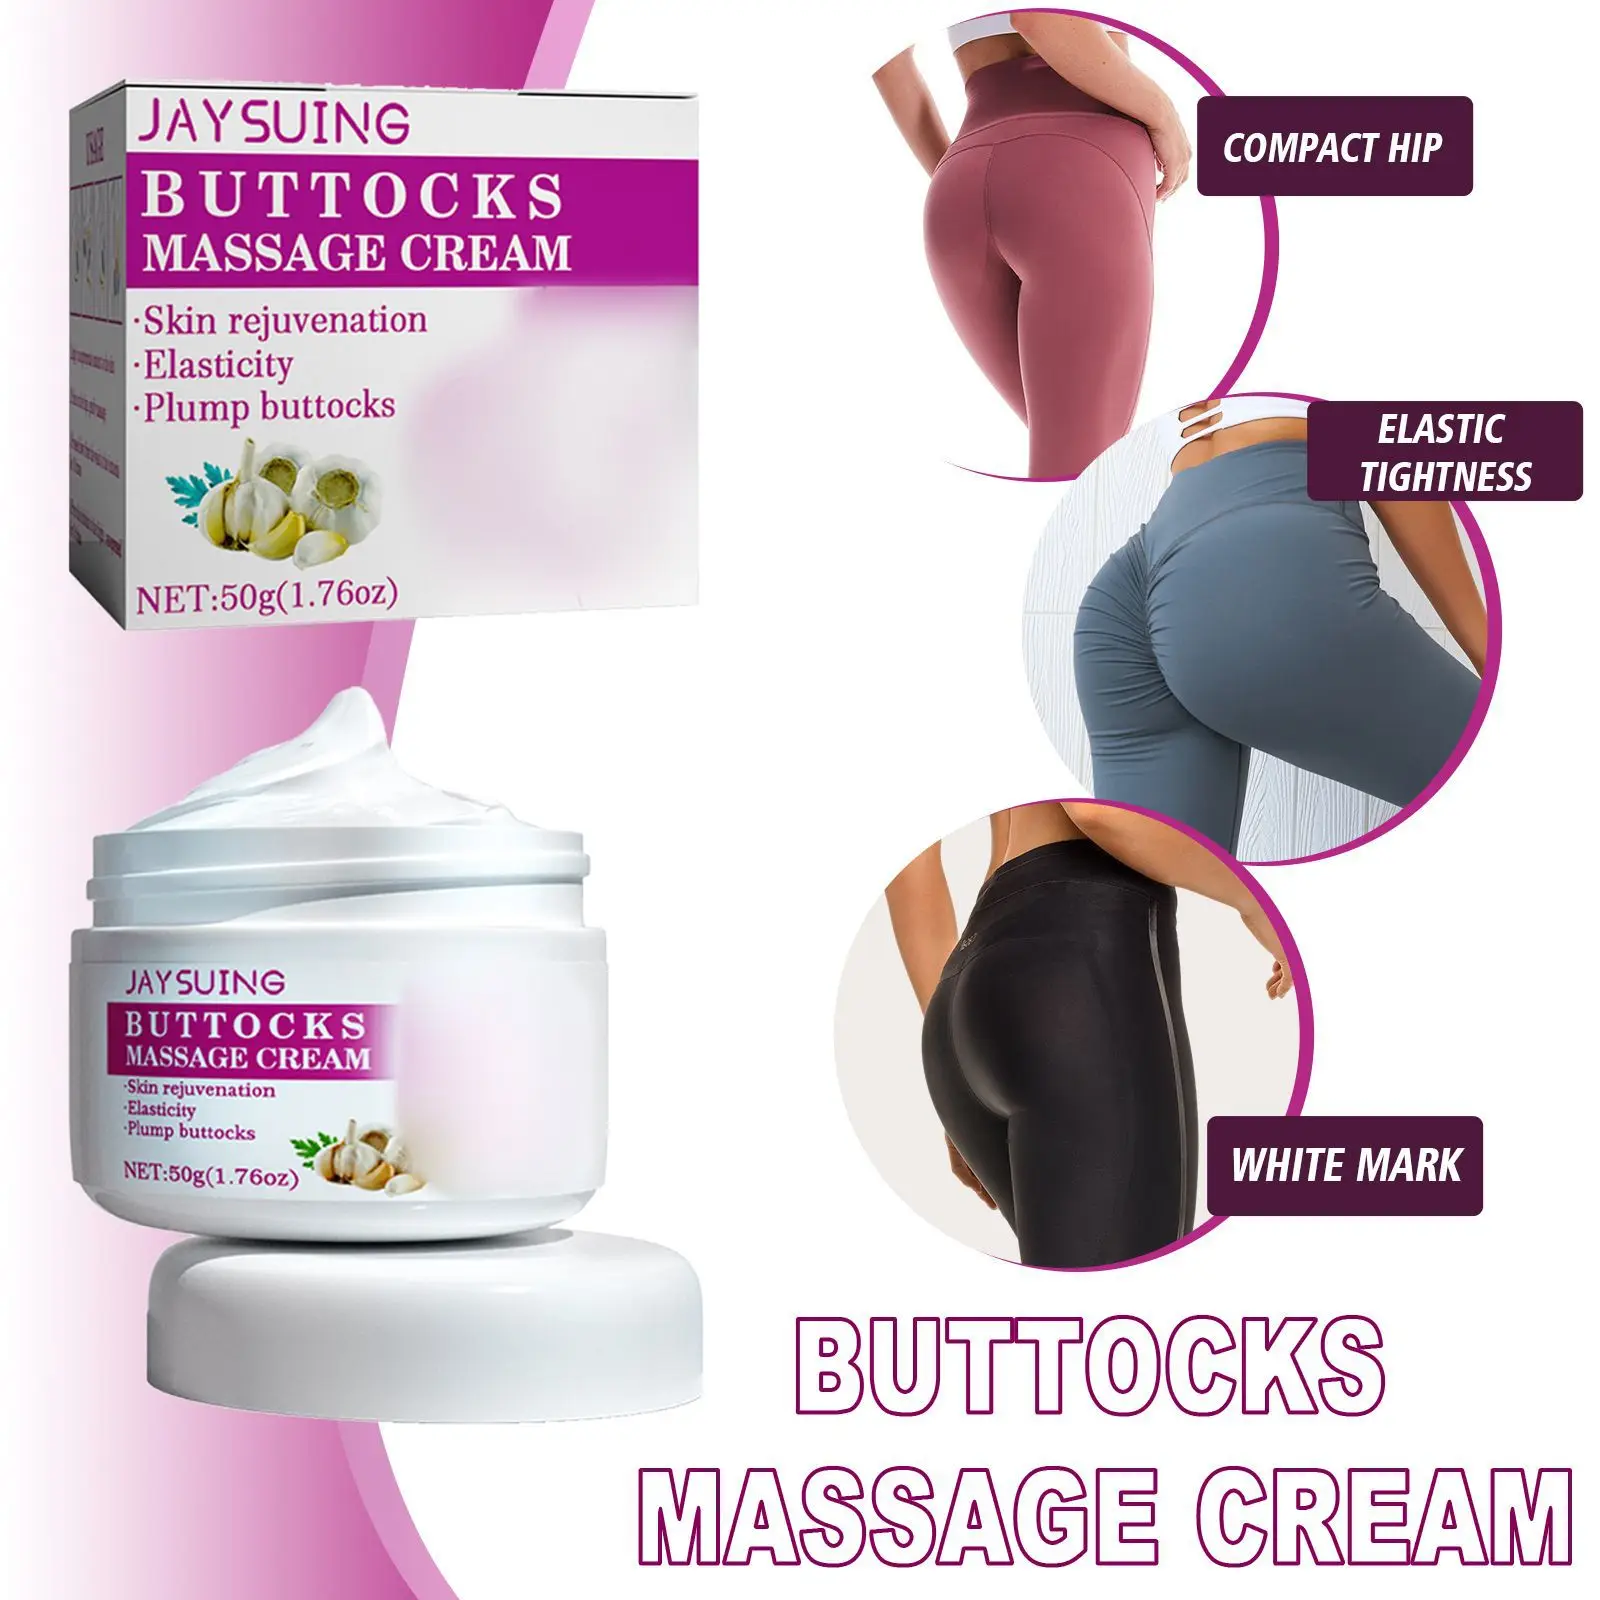 Scedd8408bc264b76bc4bbf4cf013c048A Buttock Enlargement Cream Butt Lift Up Firming Essential Oil Big Ass Enhance Hip Growth Tighten Shaping Sexy Body Care For Women